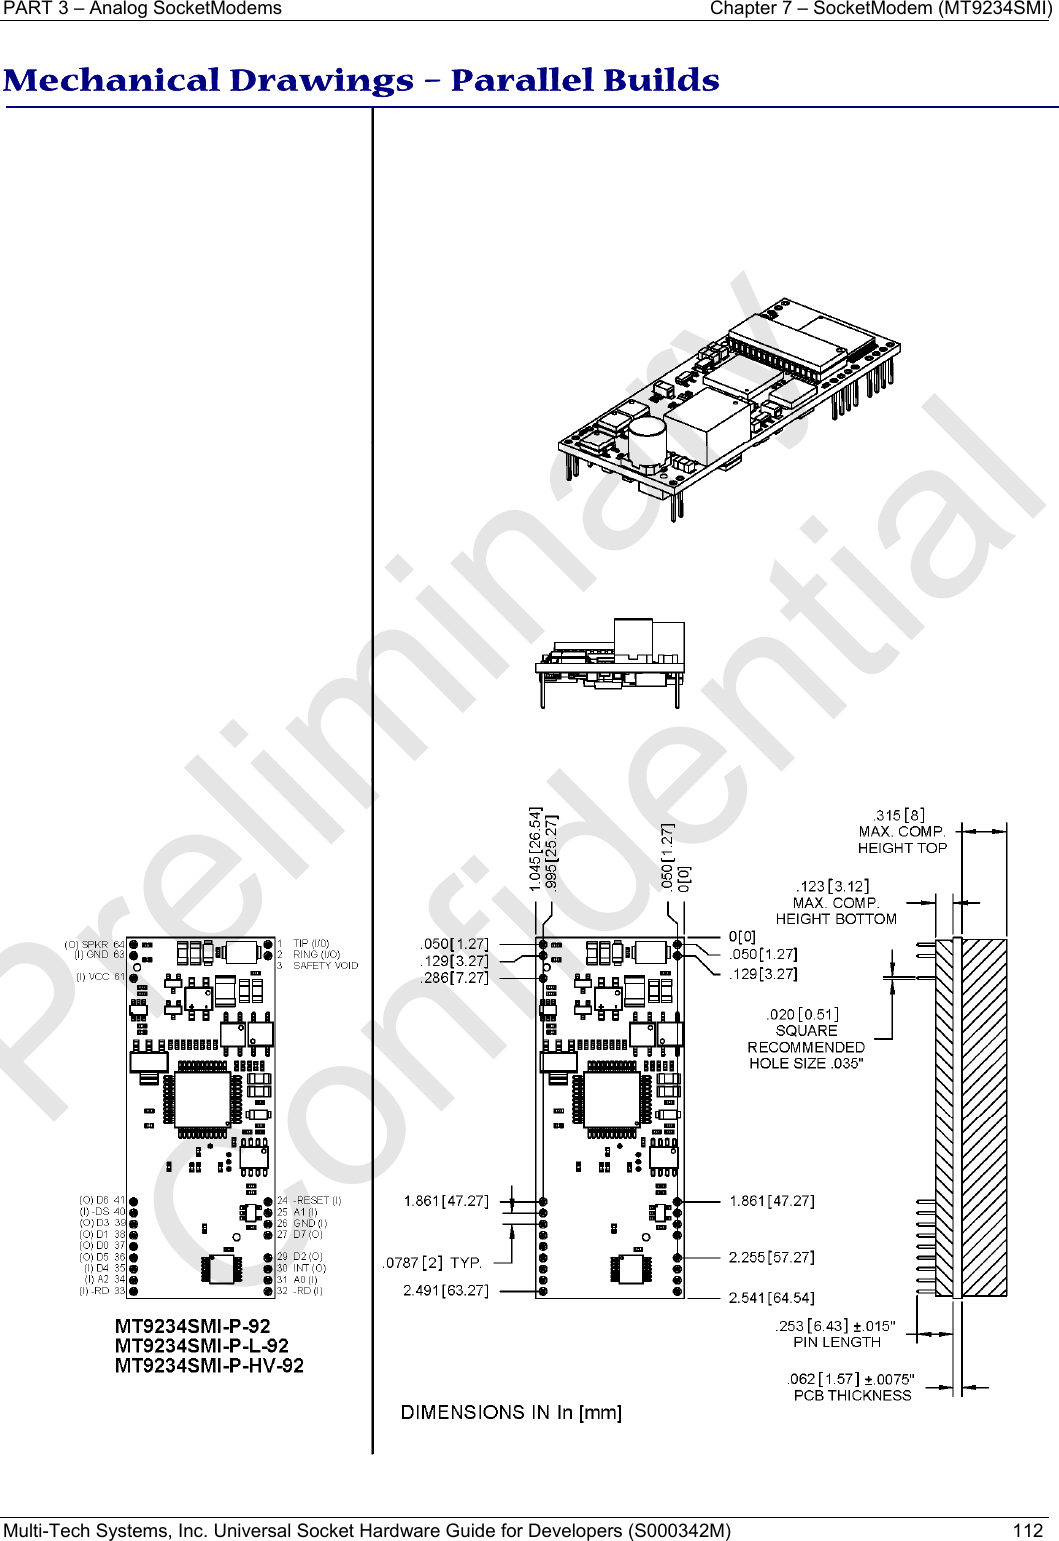 PART 3 – Analog SocketModems  Chapter 7 – SocketModem (MT9234SMI) Multi-Tech Systems, Inc. Universal Socket Hardware Guide for Developers (S000342M)  112   Mechanical Drawings – Parallel Builds     Preliminary  Confidential